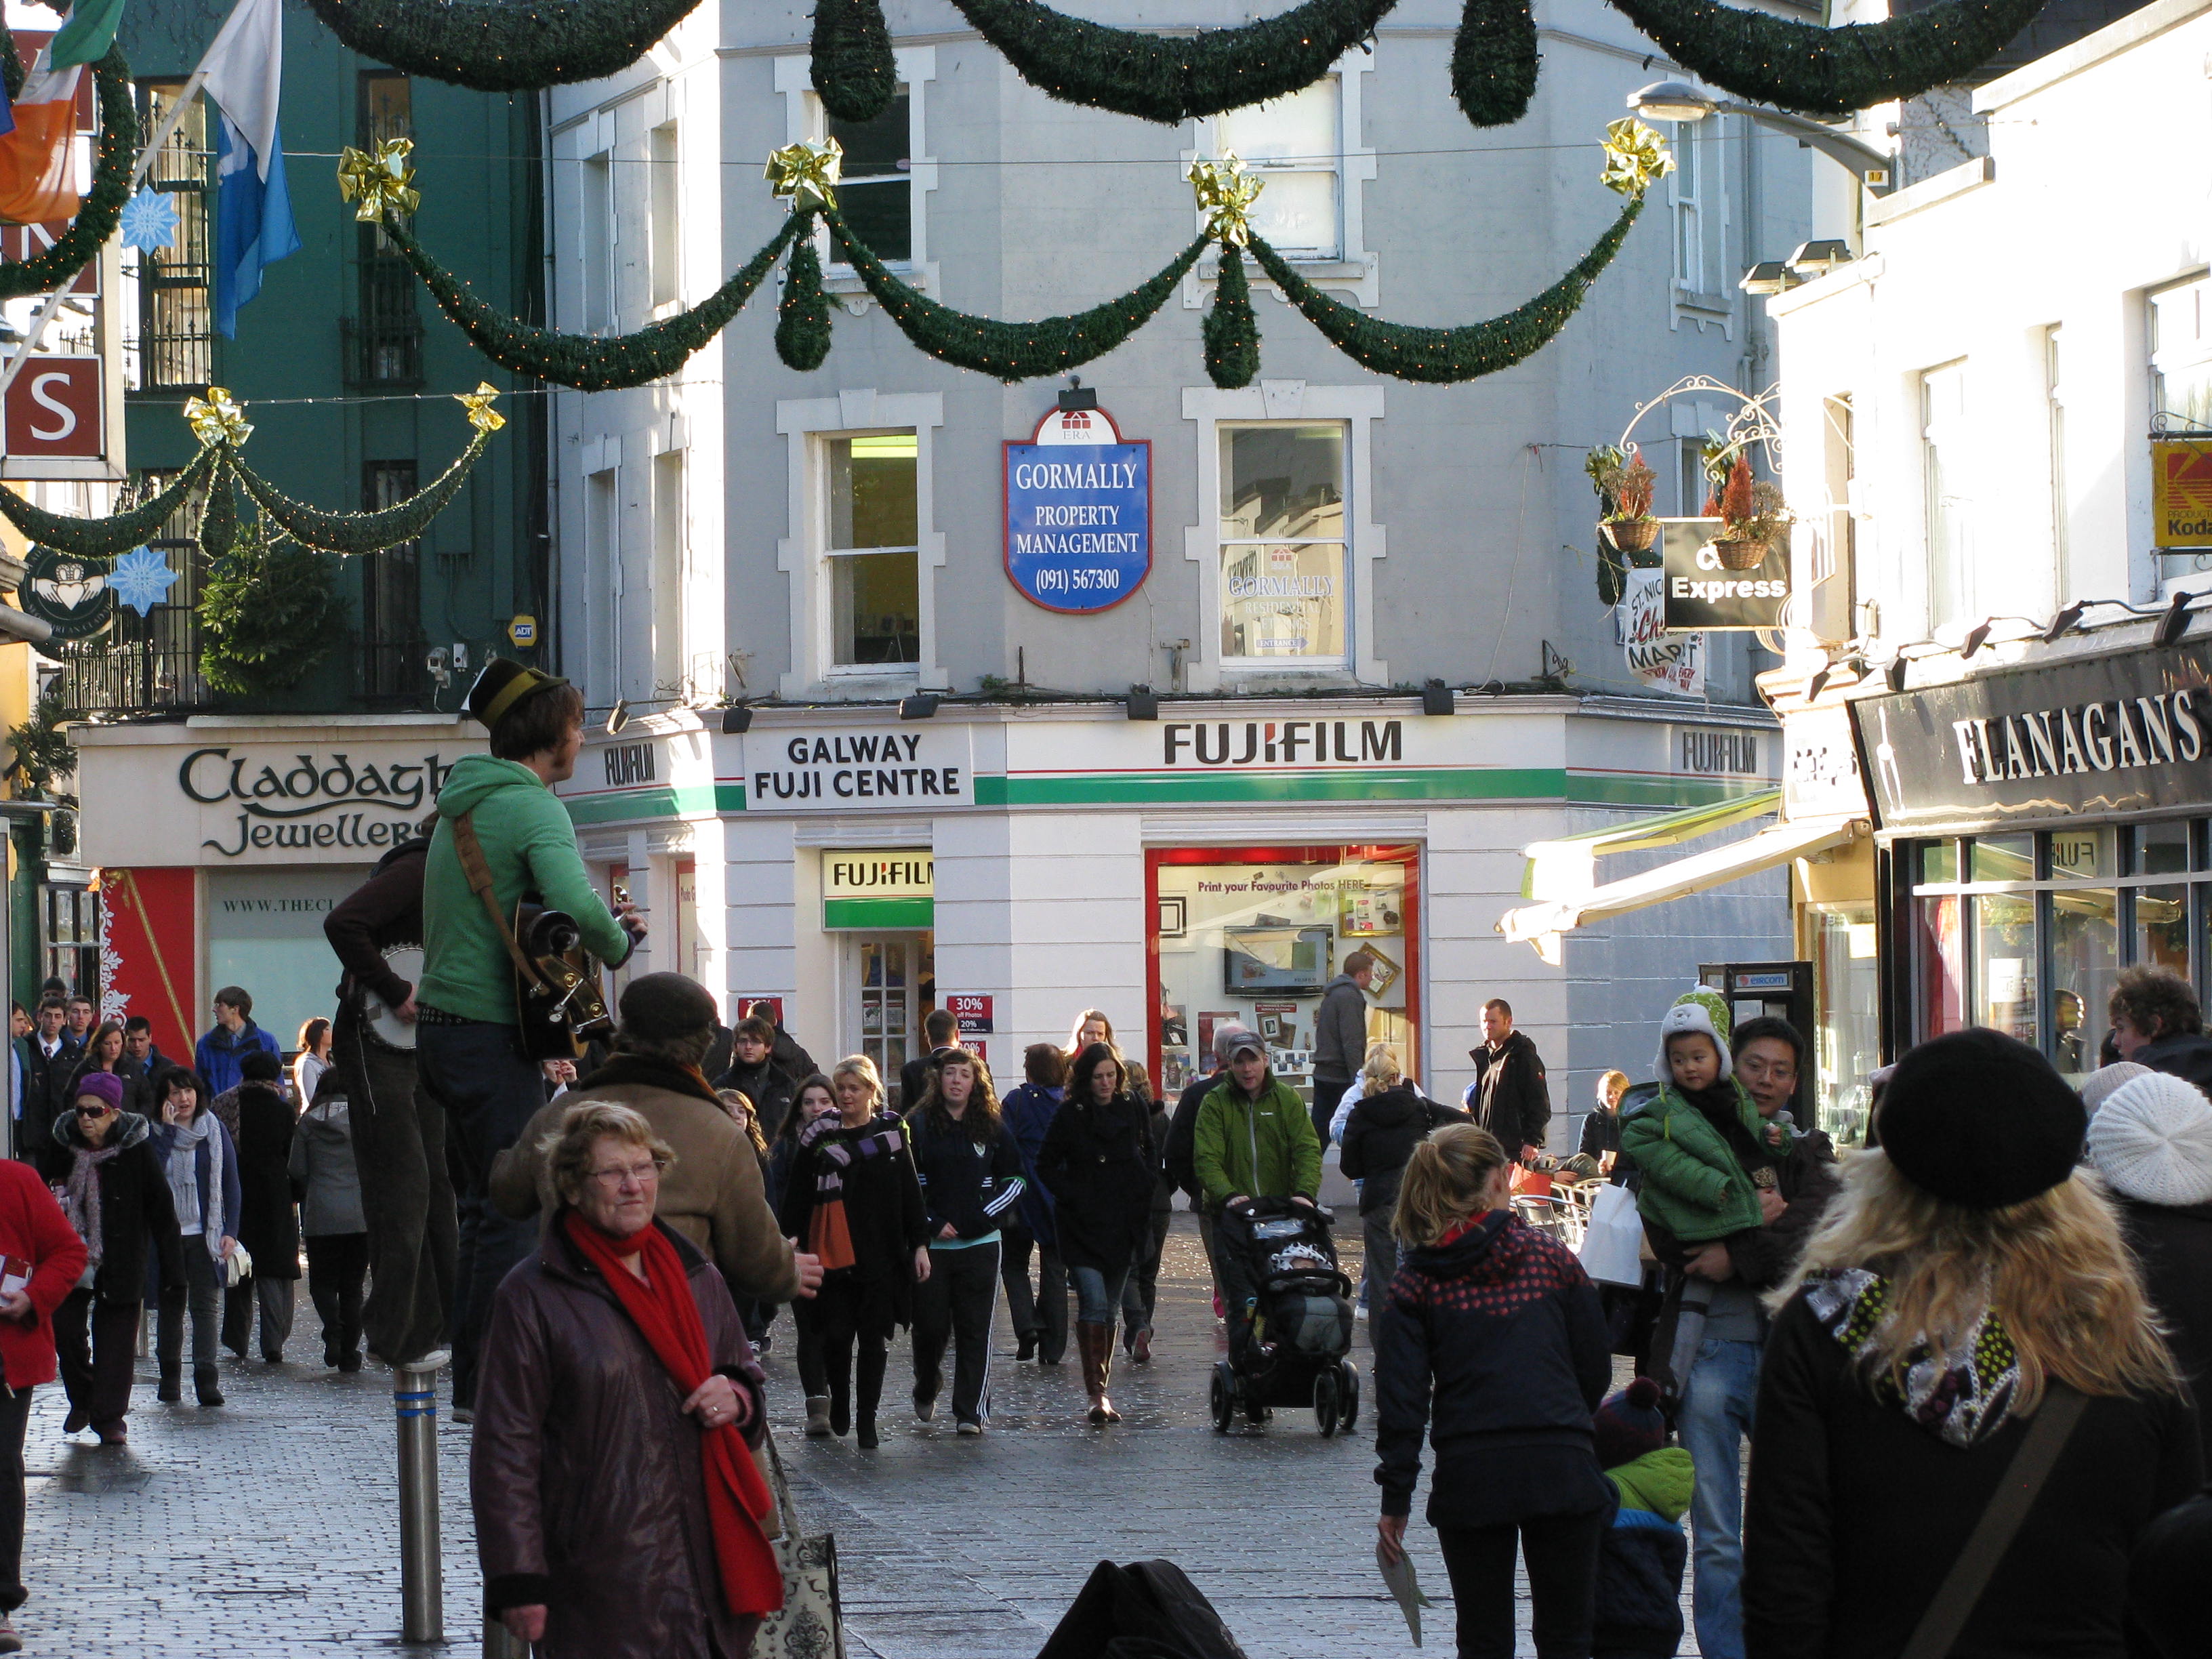 Buskers in Galway